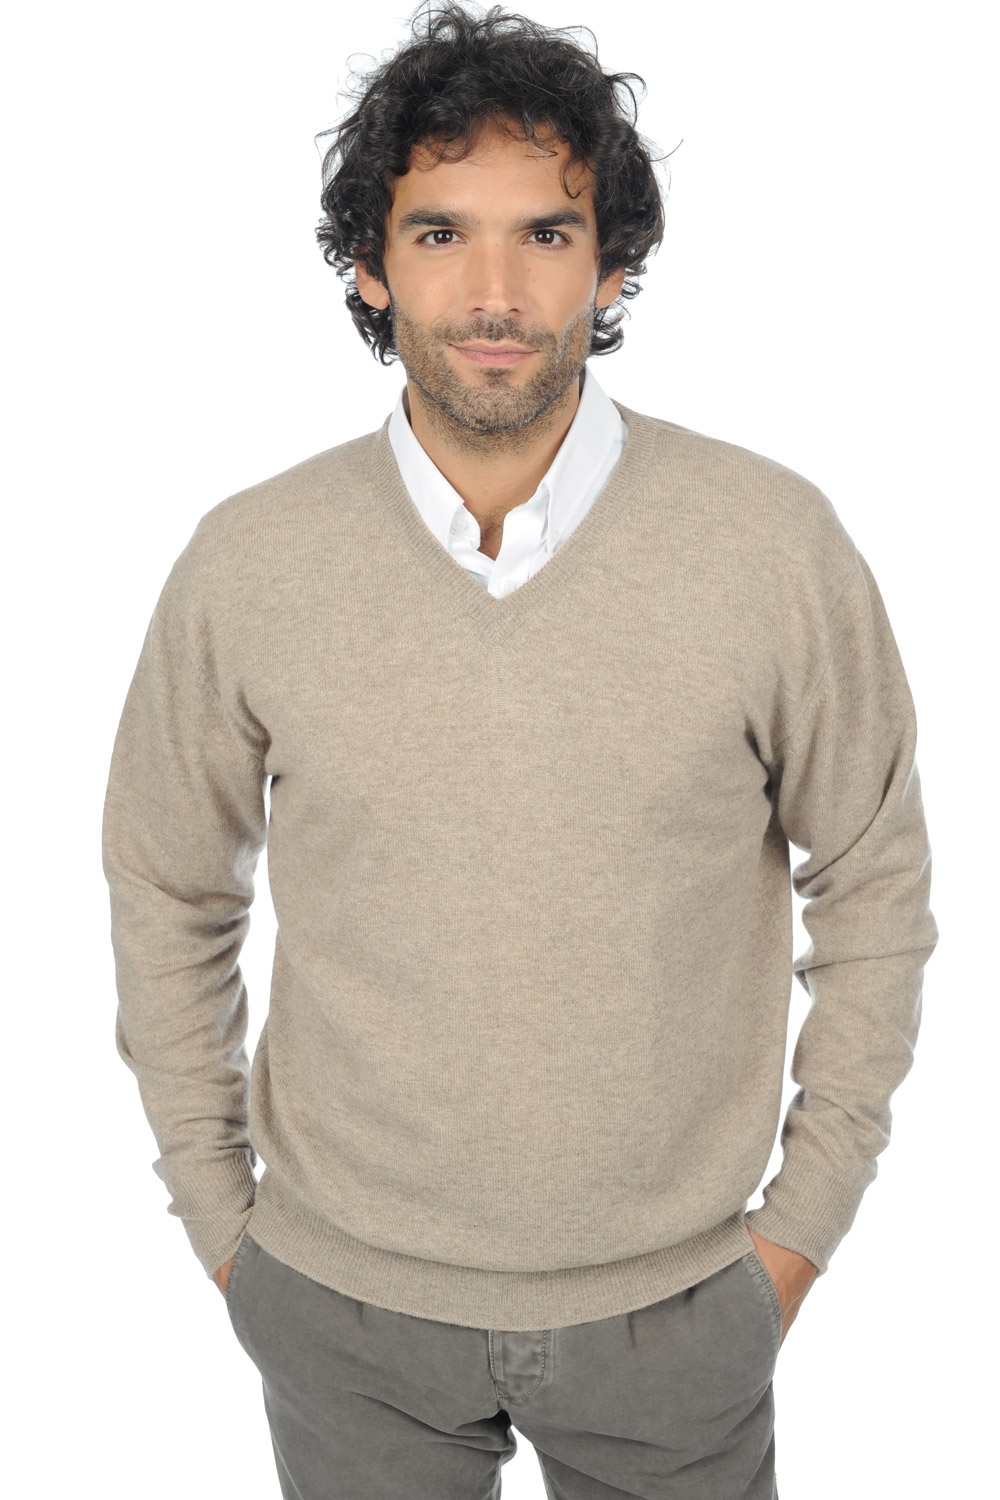 Cashmere men hippolyte natural brown xs